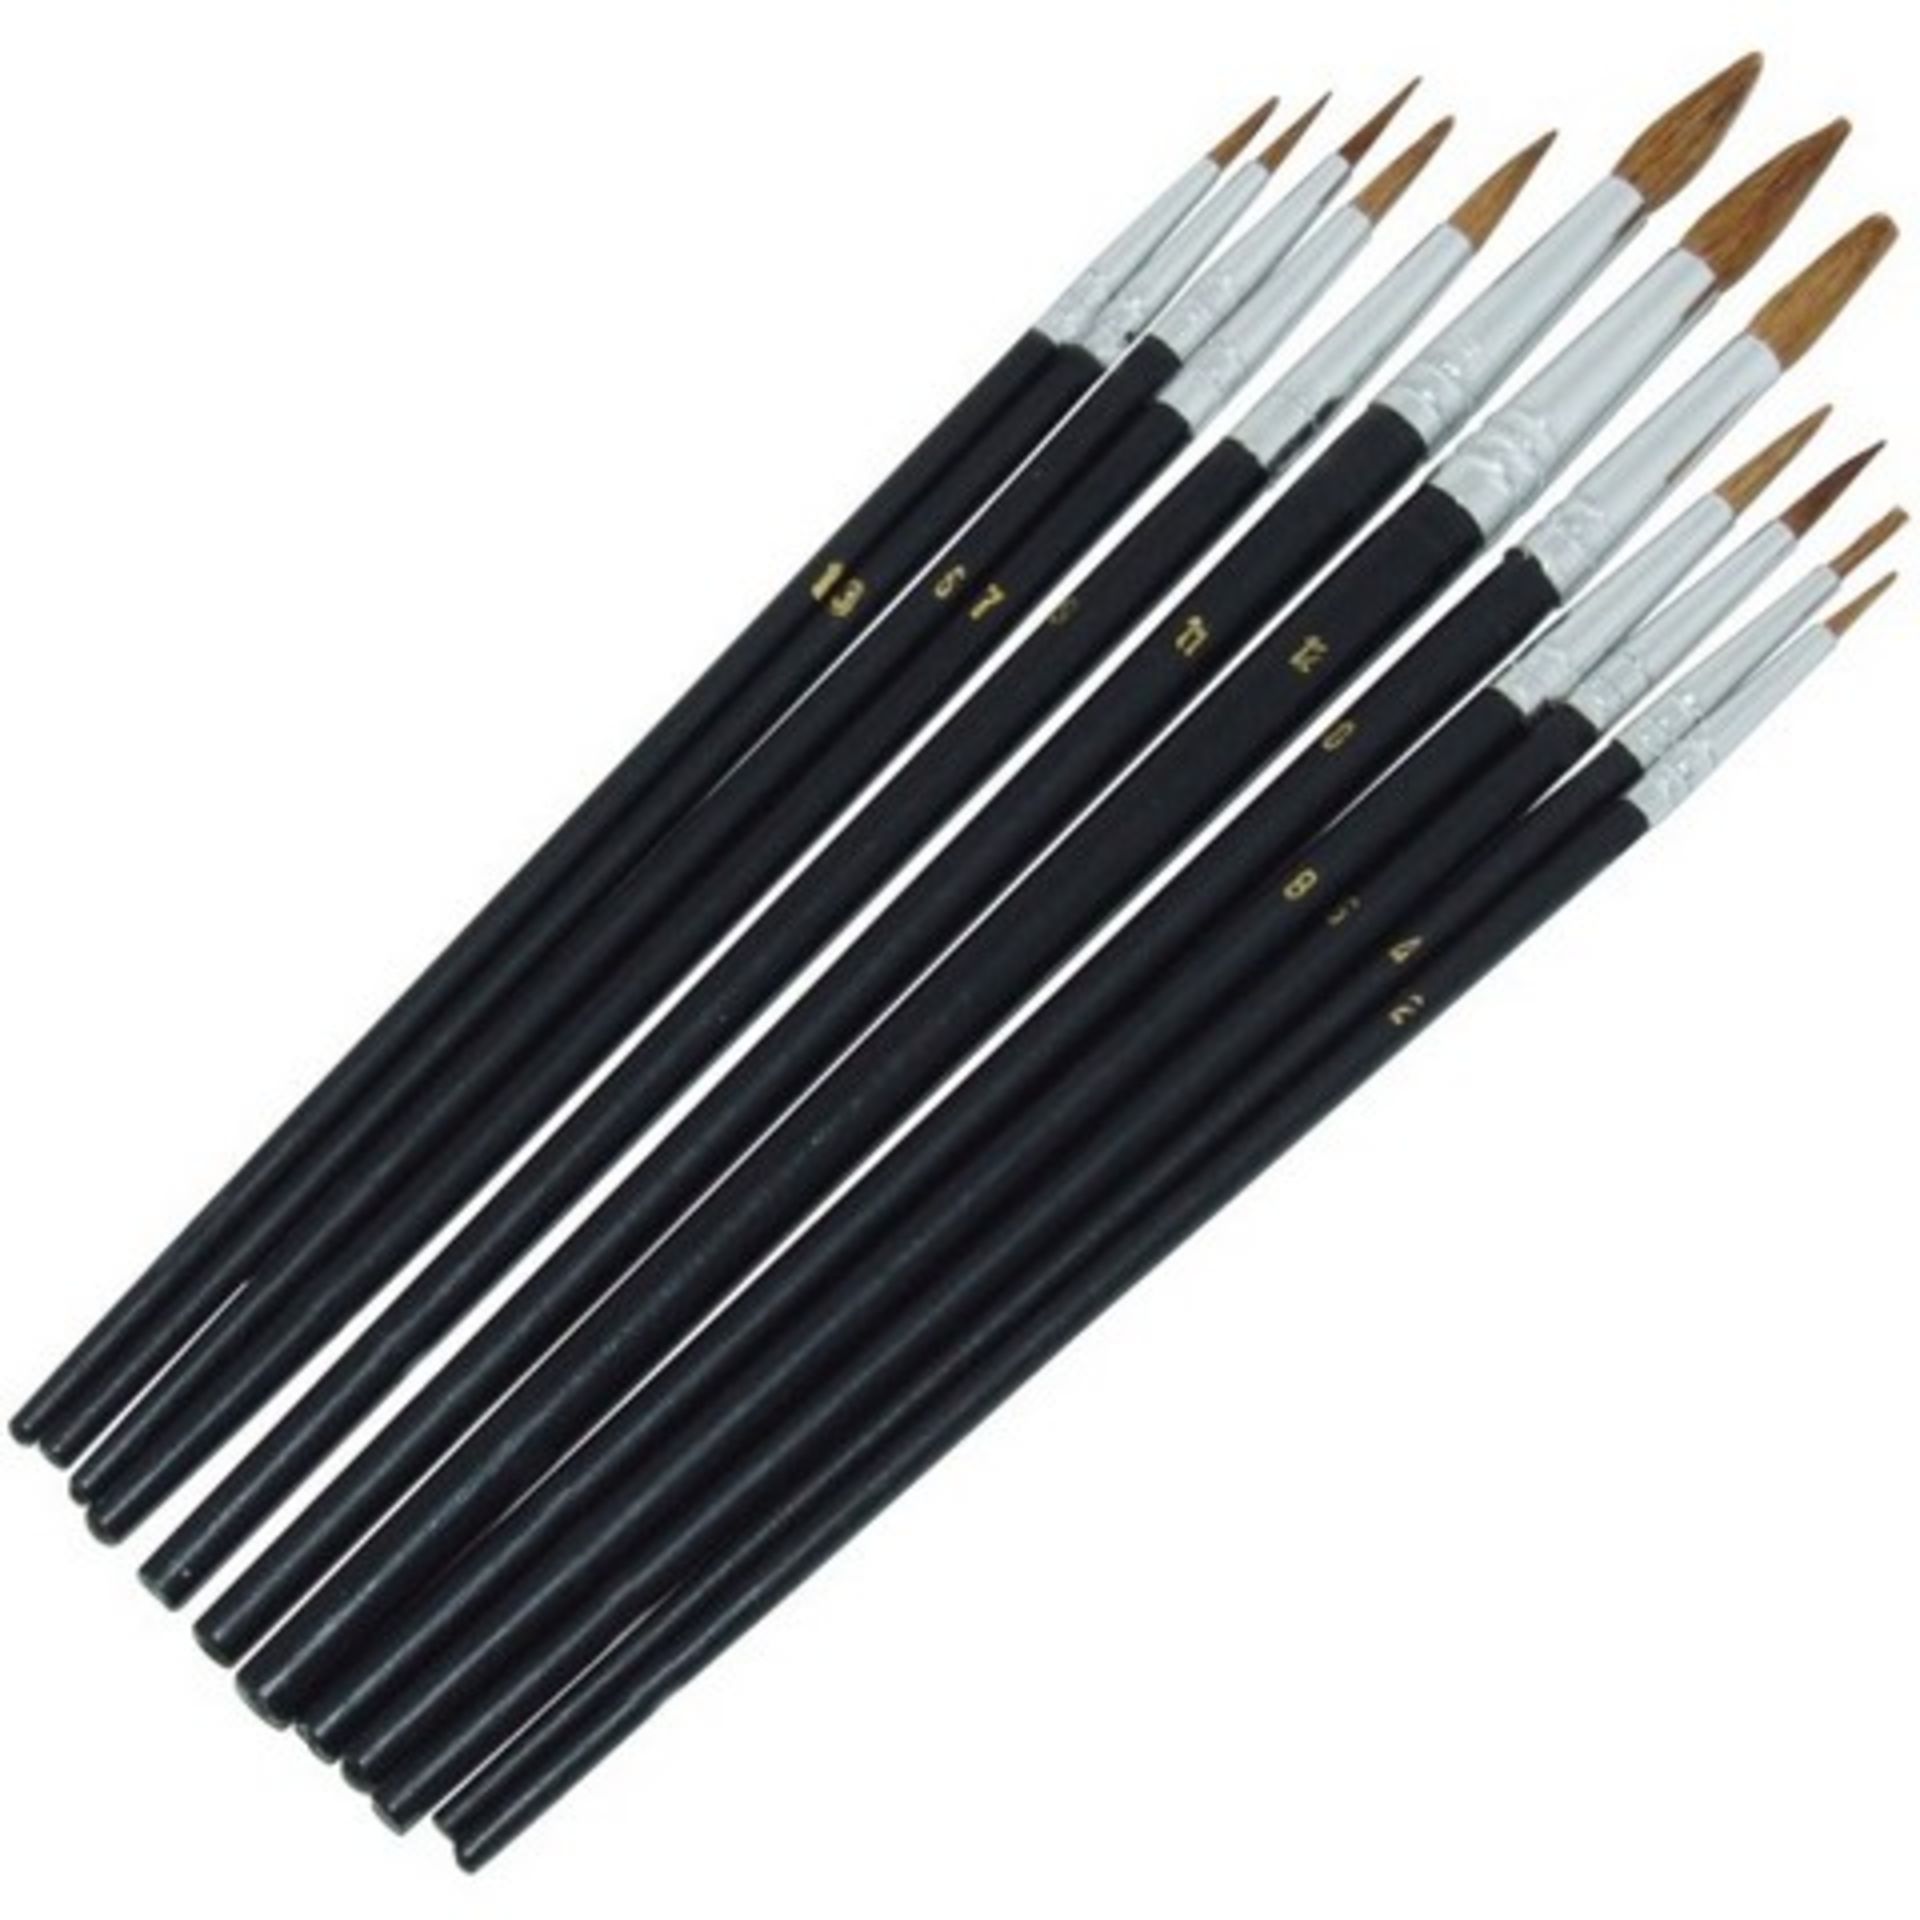 V Brand New Two Artist Brush Sets Being Suitable For Watercolours And Oils/Model Making Etc - Image 2 of 2